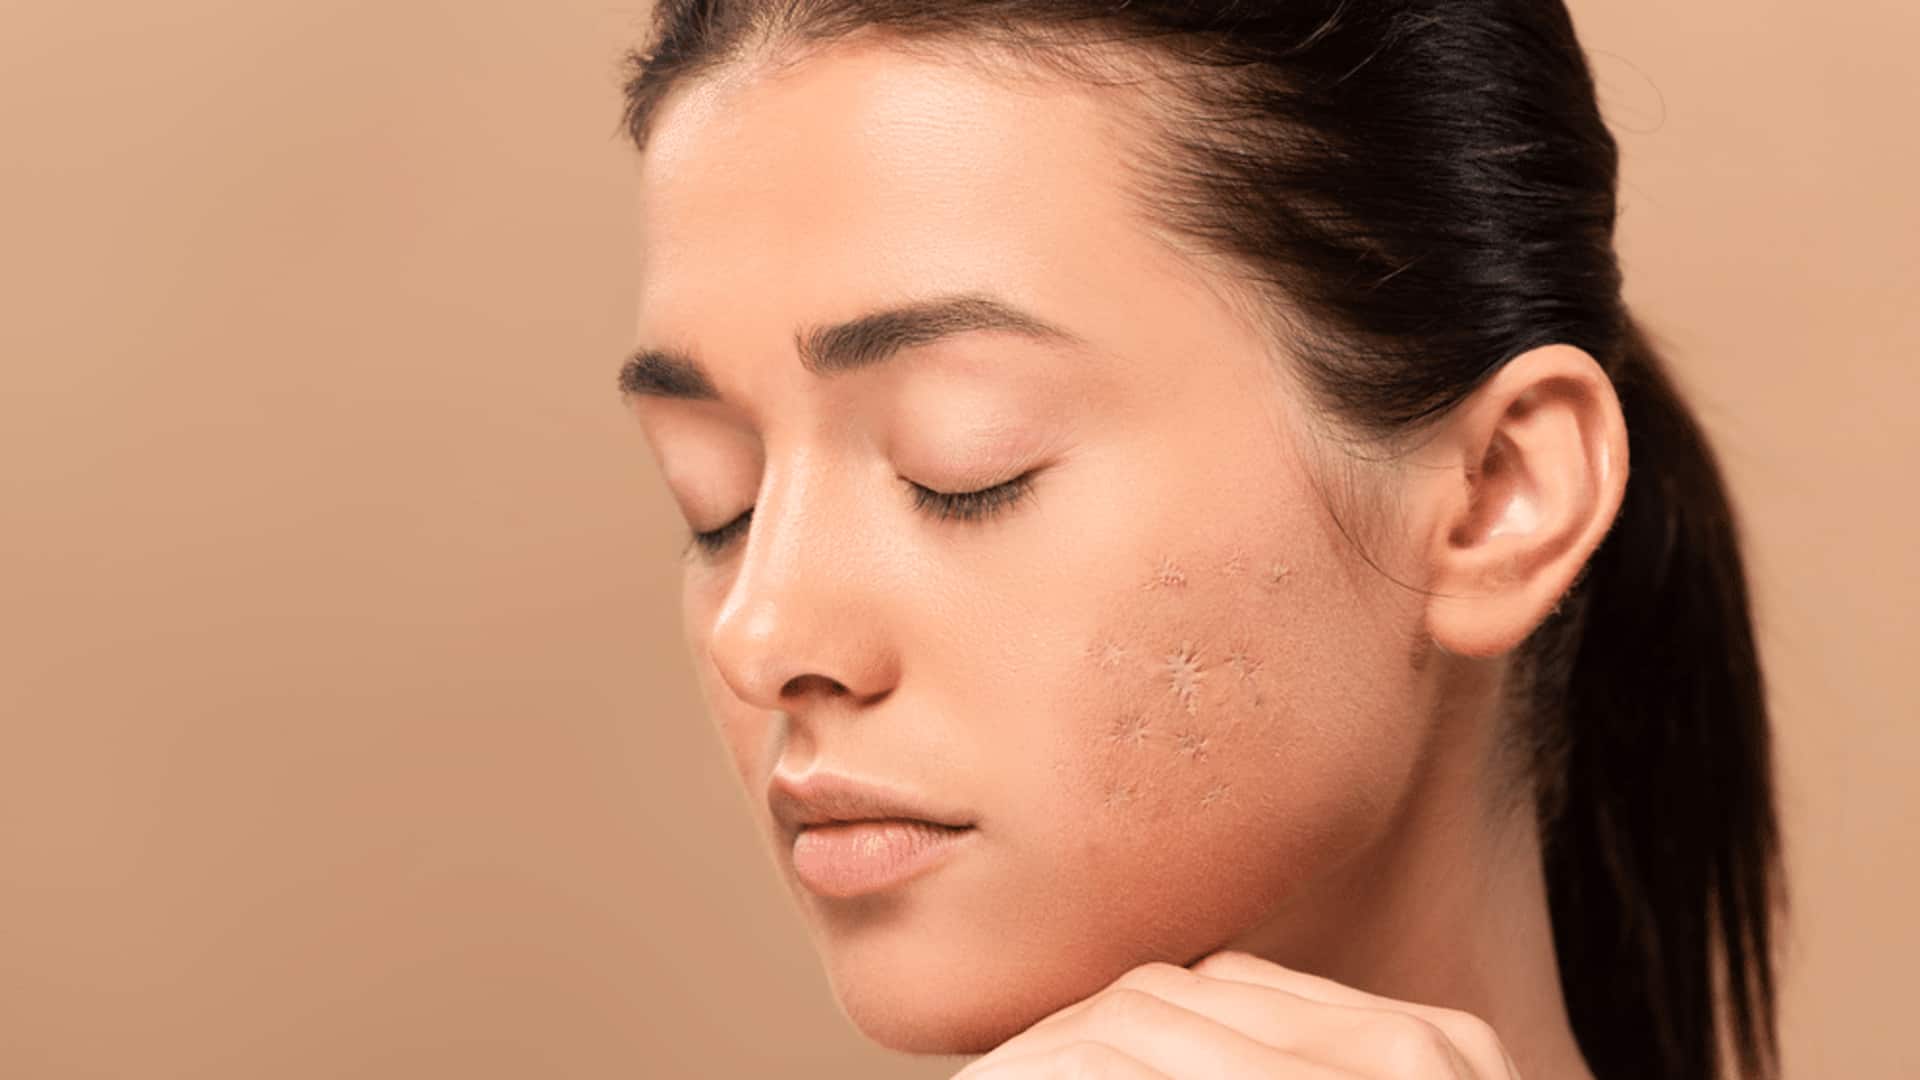 These home remedies will help fade stubborn acne scars 